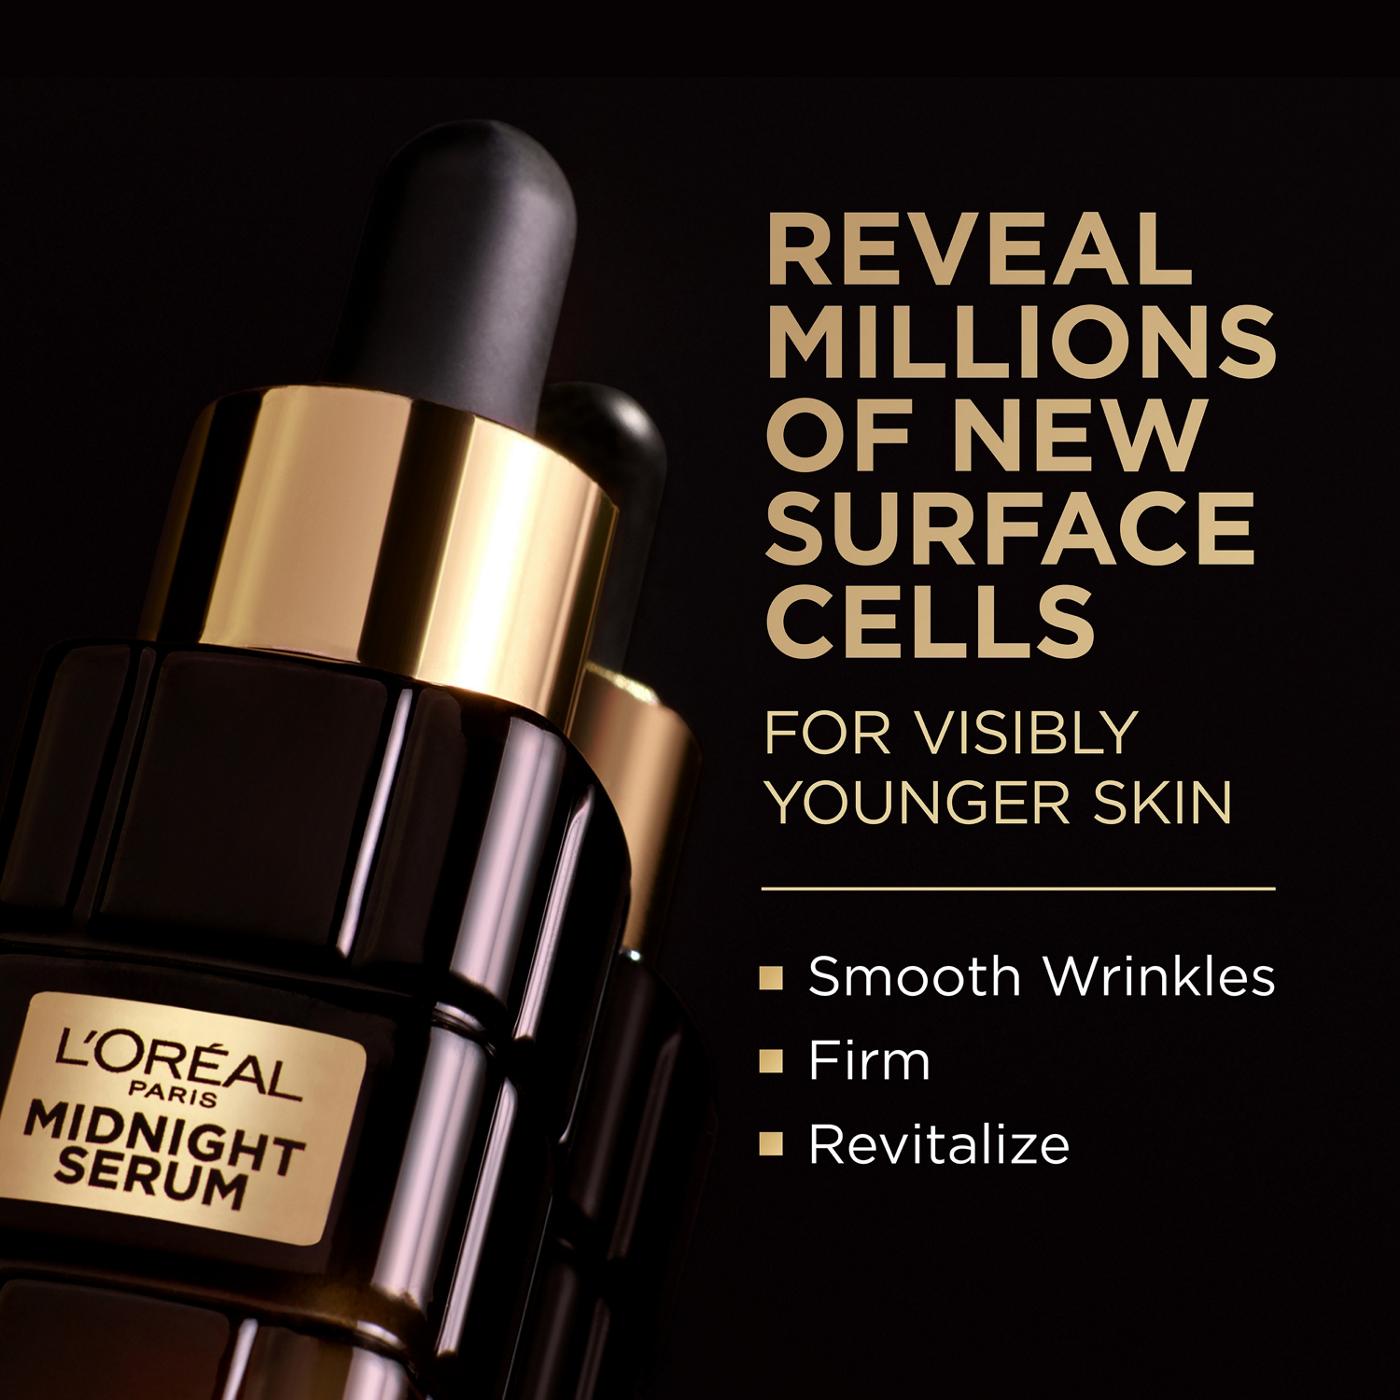 L'Oréal Paris Age Perfect Cell Renewal Midnight Serum Anti-Aging Complex; image 7 of 7